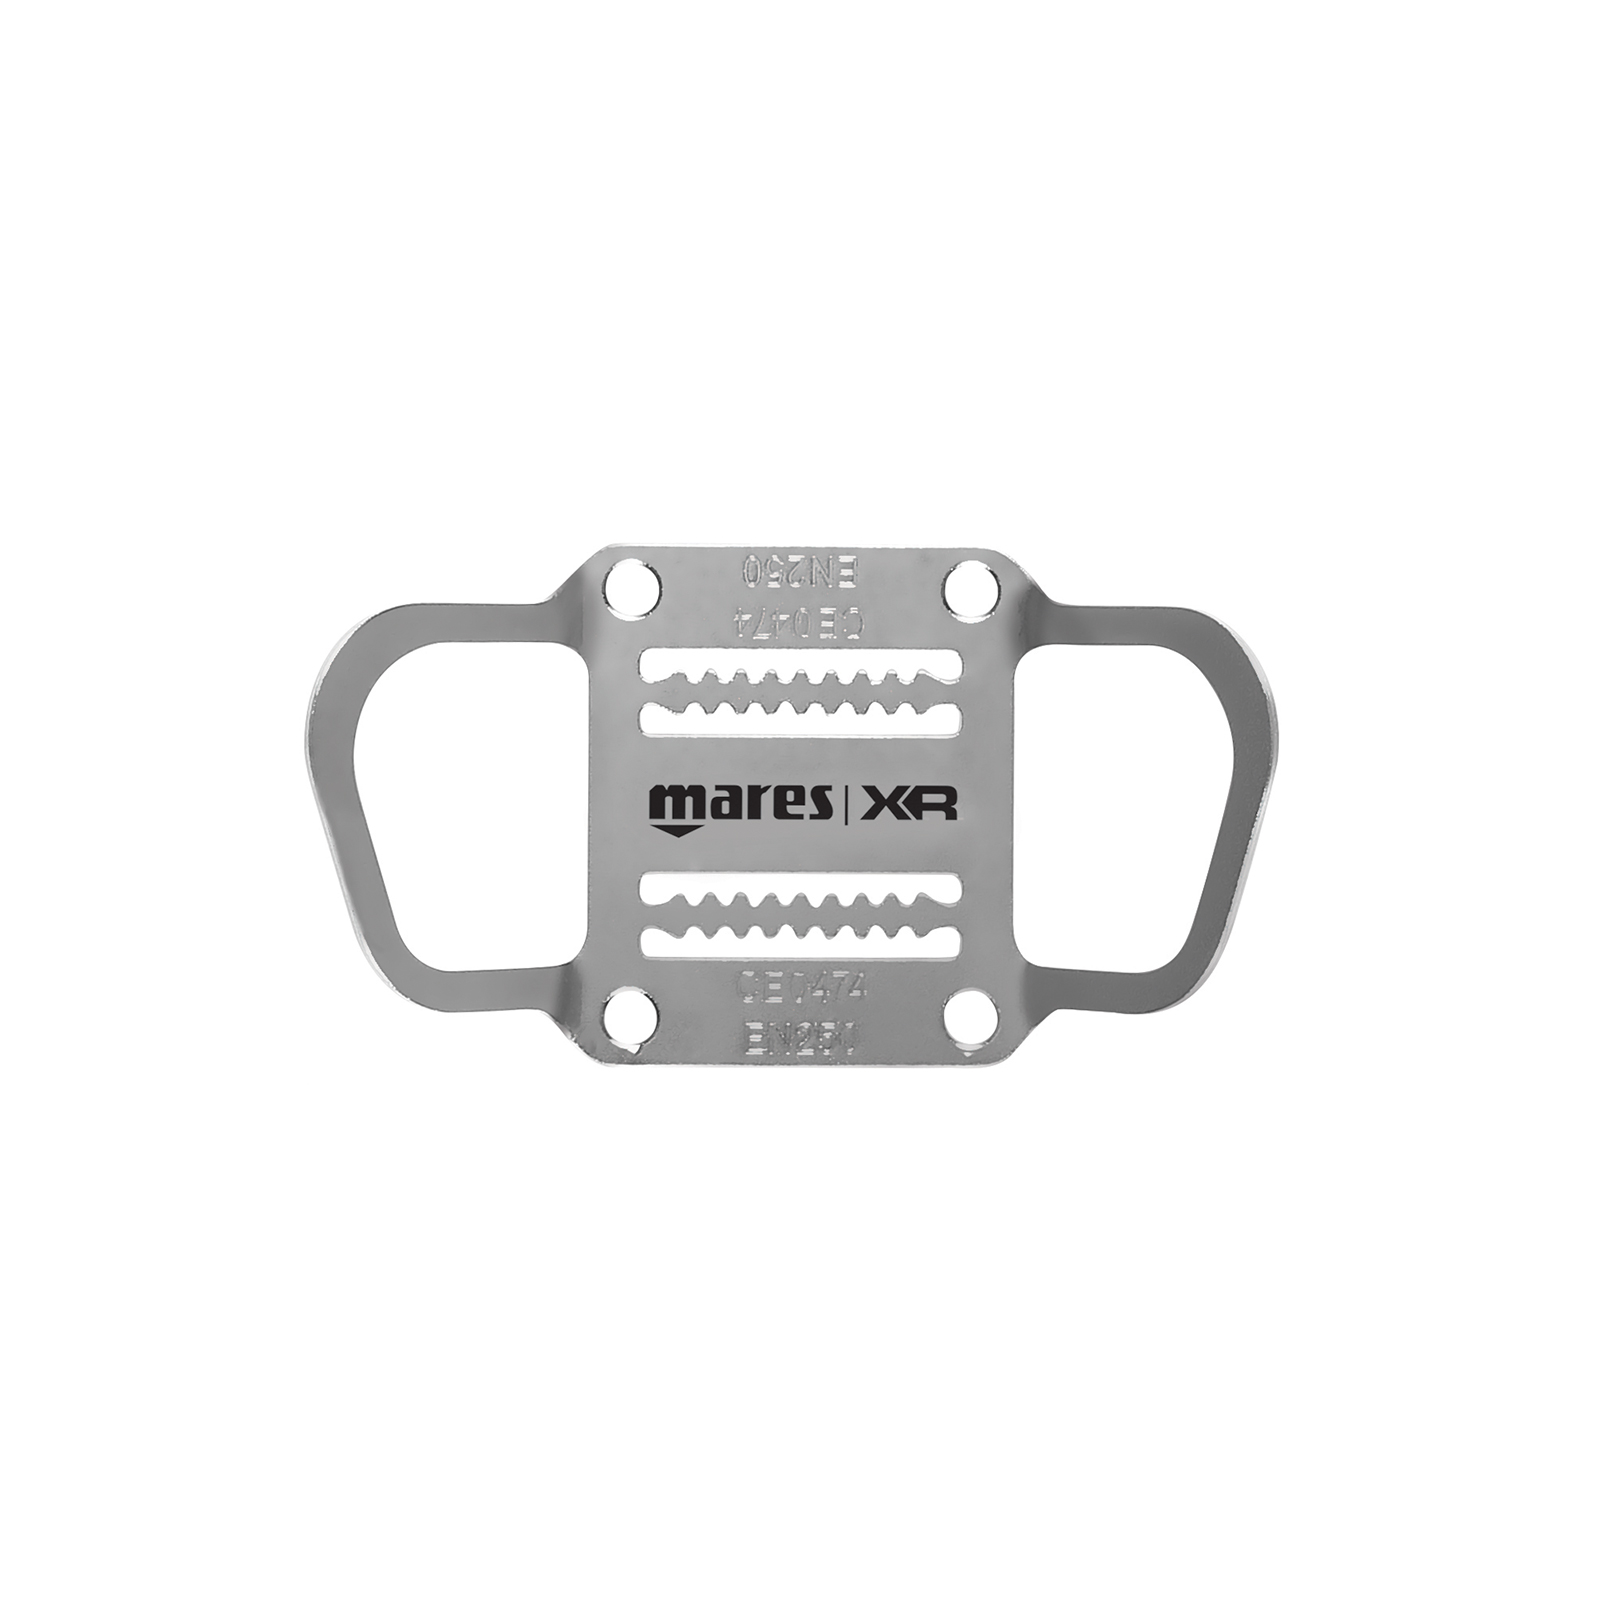 Mares XR Sidemount SS316 Tail Plate